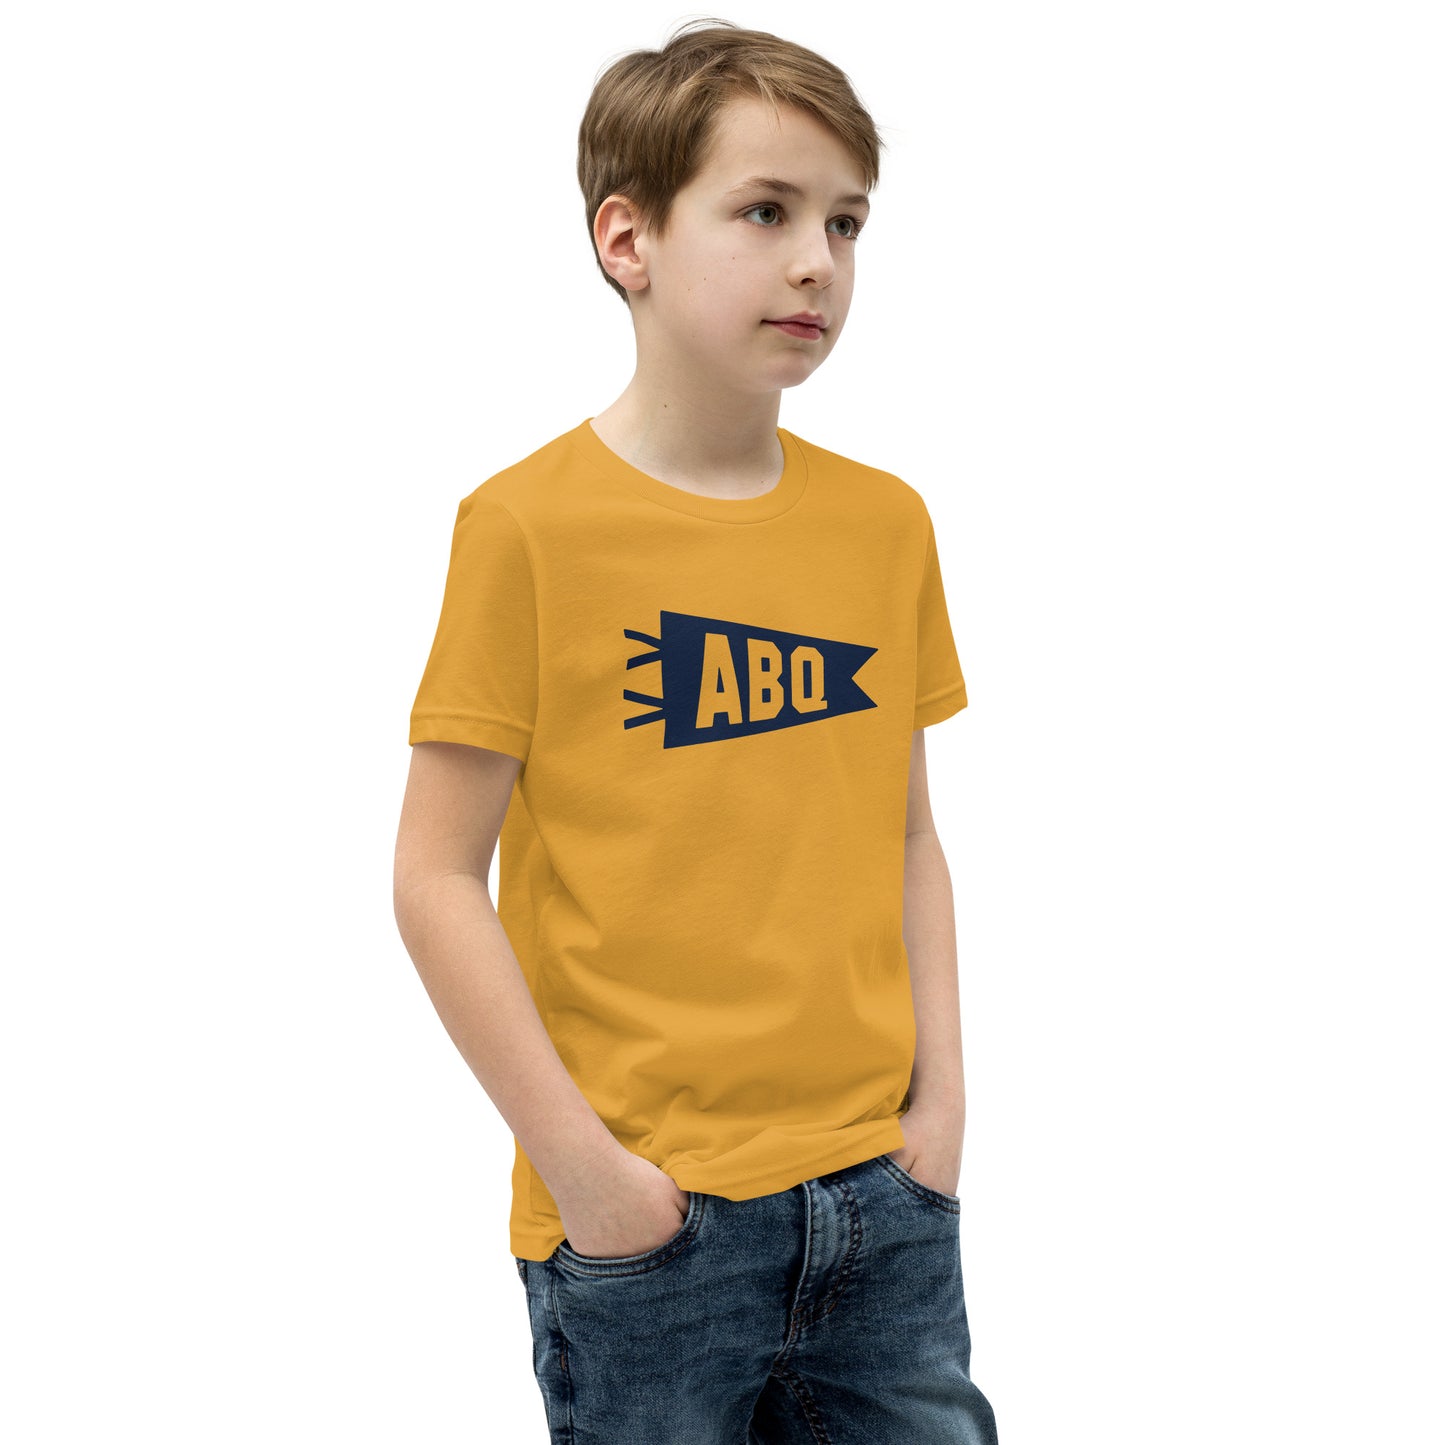 Kid's Airport Code Tee - Navy Blue Graphic • ABQ Albuquerque • YHM Designs - Image 07